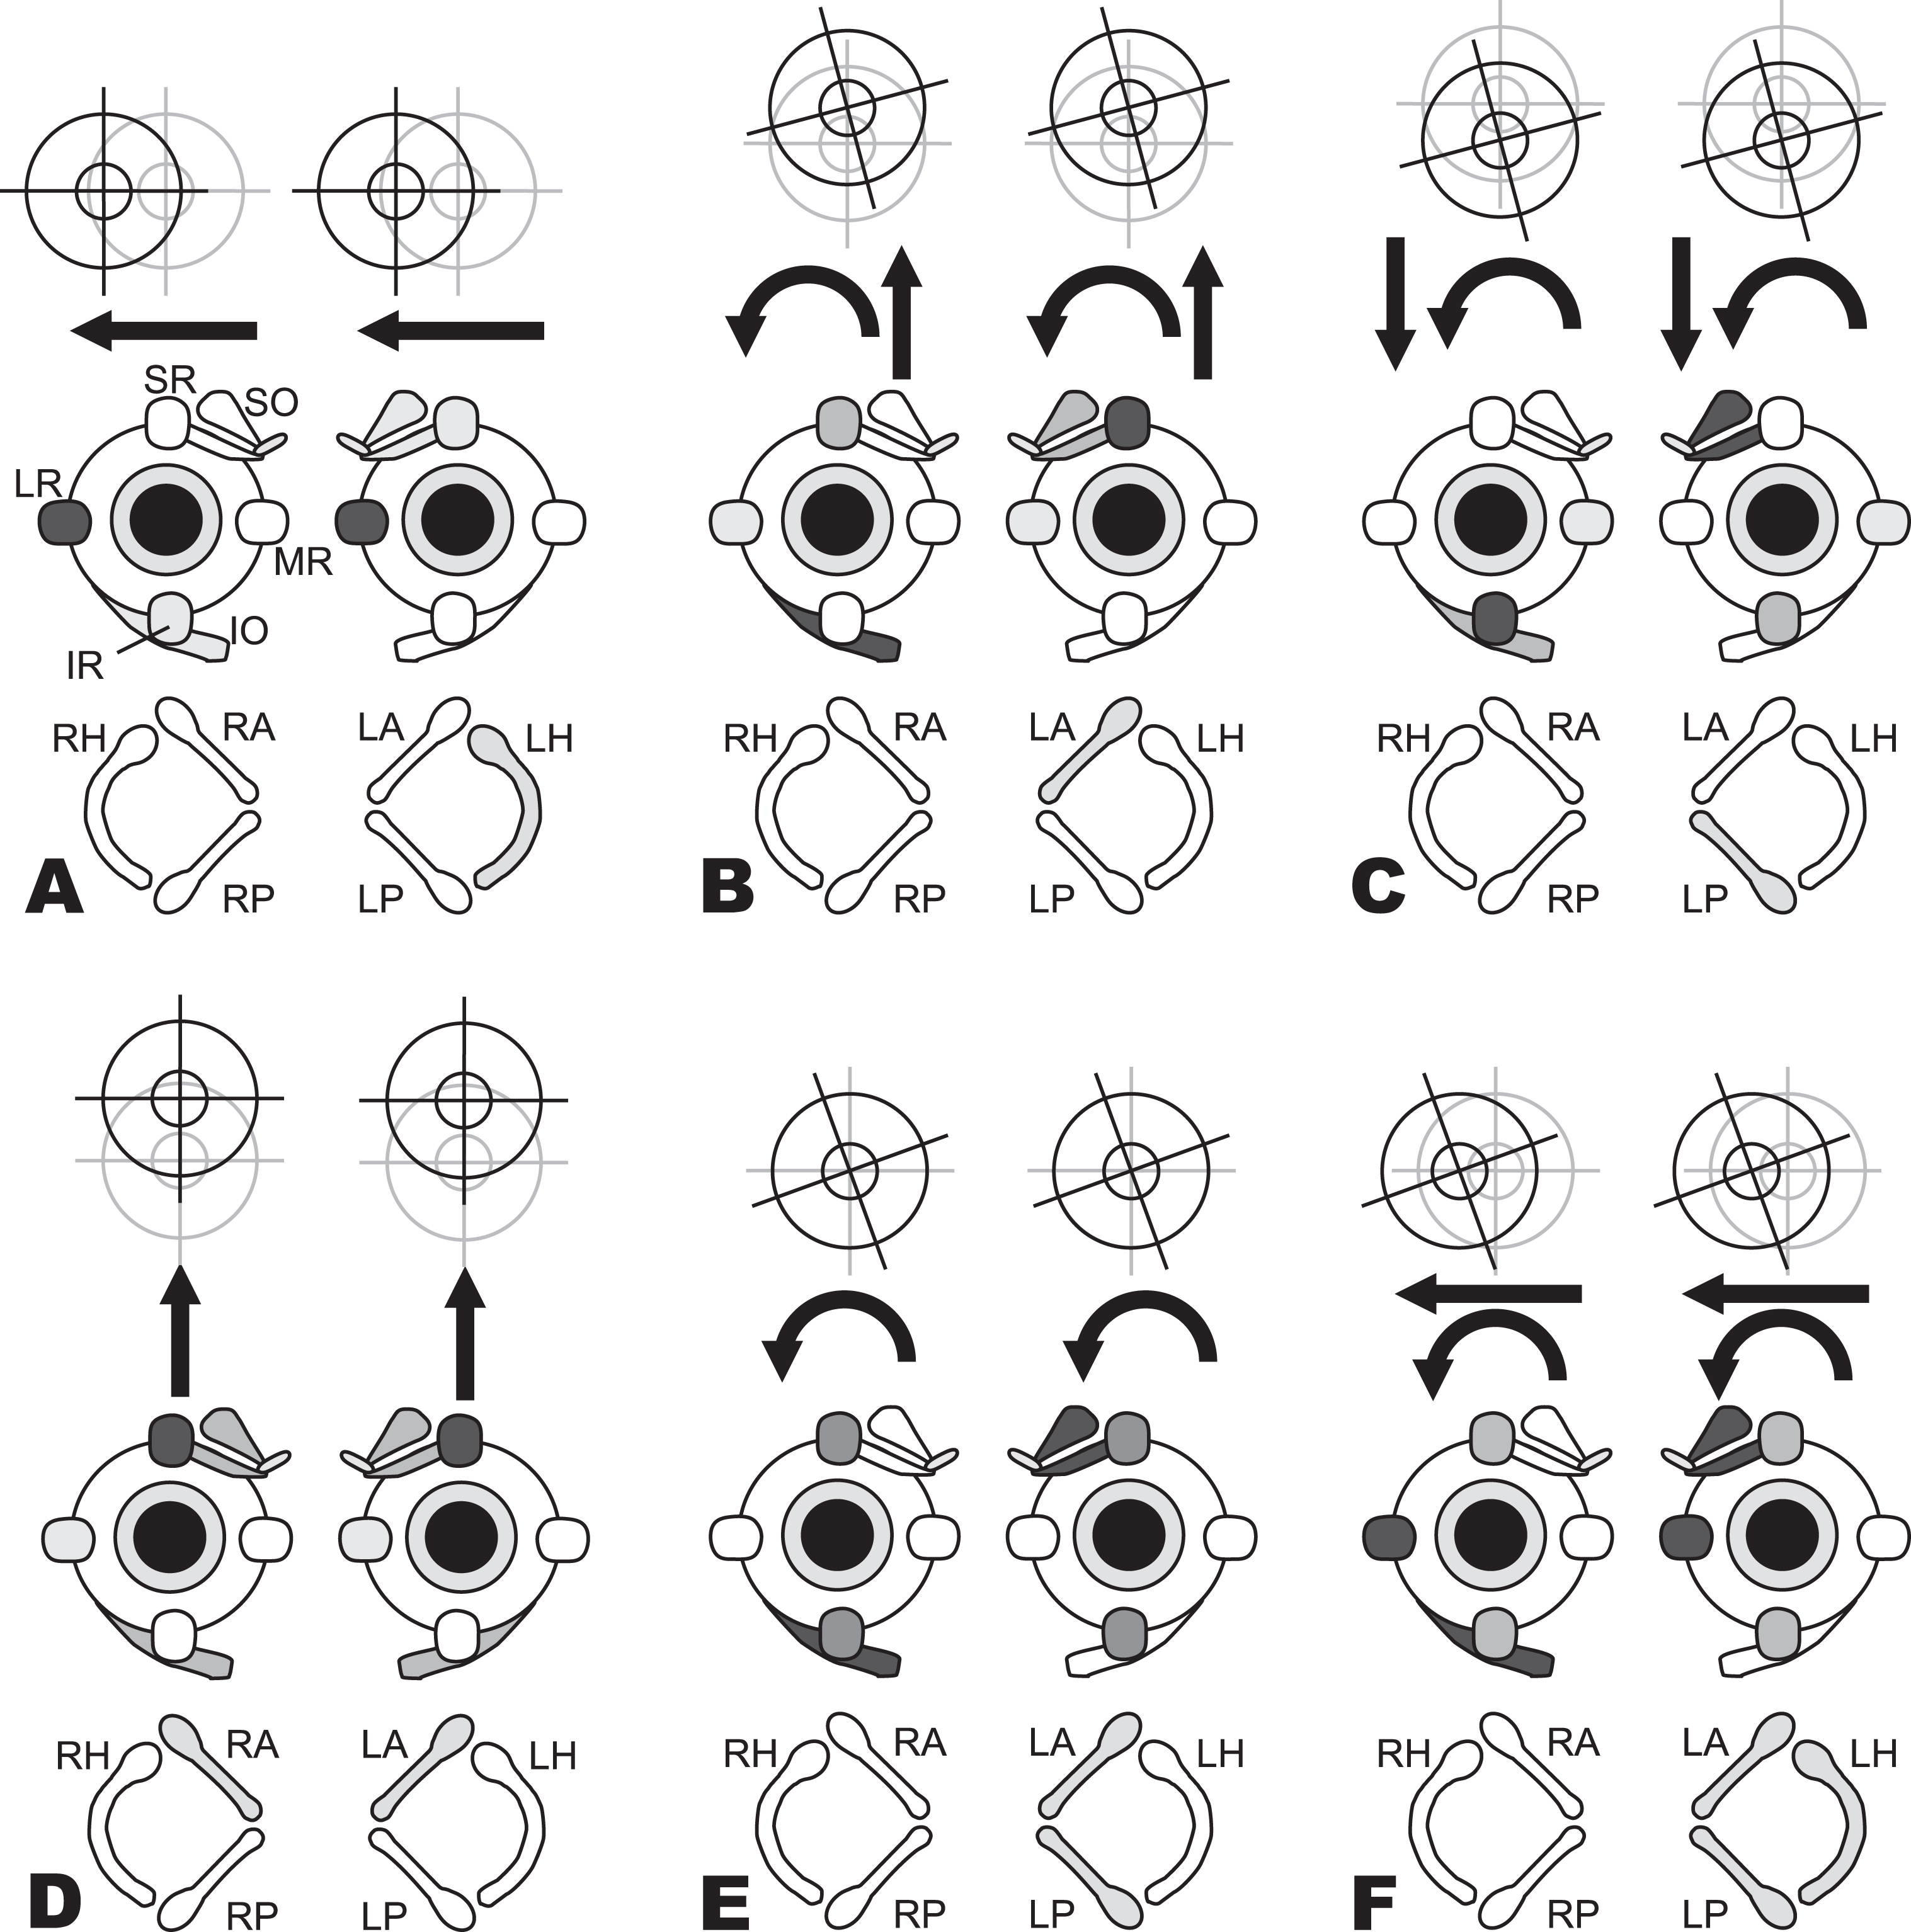 Nystagmus slow phases observed for excitation of individual semicircular canals. In the bottom row of each panel (A through F), shading indicates the excited canals. In the second row, a diagram of the extraocular muscles depicts which muscles are activated (darker shading indicates stronger activation). In the top row, the resultant yaw, pitch, and/or roll eye movements are indicated. (A) Excitation of the left horizontal (LH) canal causes rightward slow phases mainly as a result of strong activation of right lateral rectus (LR) and left medial rectus (MR). (B) Excitation of the left anterior (LA) canal causes upward/clockwise (from patient’s perspective) slow phase because of the combined action of the right inferior oblique (IO) and superior rectus (SR) and the left superior oblique (SO) and SR. (C) Excitation of the left posterior (LP) canal causes downward/clockwise (from patient’s perspective) slow phases as a result of the combined action of the right IO and inferior rectus (IR) and the left SO and IR. (D) Combined equal excitation of both the left anterior (LA) and right anterior (RA) canals activates bilateral SR and oblique muscles and causes purely upward slow phases since the torsional components from each canal cancel each other. (E) Combined equal excitation of left anterior (LA) and left posterior (LP) canals excites muscle activity that is the sum of each canal’s individual effect; upward and downward pulls cancel, which results in a purely torsional nystagmus. (F) Combined equal excitation of all three left canals causes a right-clockwise (from patient’s perspective) slow phase, the expected result of summing activity for each individual canal. (Modified from Cohen et al [37]; adapted from Cummings Otolaryngology: Head and Neck Surgery. Flint, Haughey (eds.). Sixth edition [61]. Chapter 163: Principles of applied vestibular physiology. Carey JP, Della Santina CC. ISBN: 978-1-4557-4696-5. Data adjusted to human head frame of reference.)